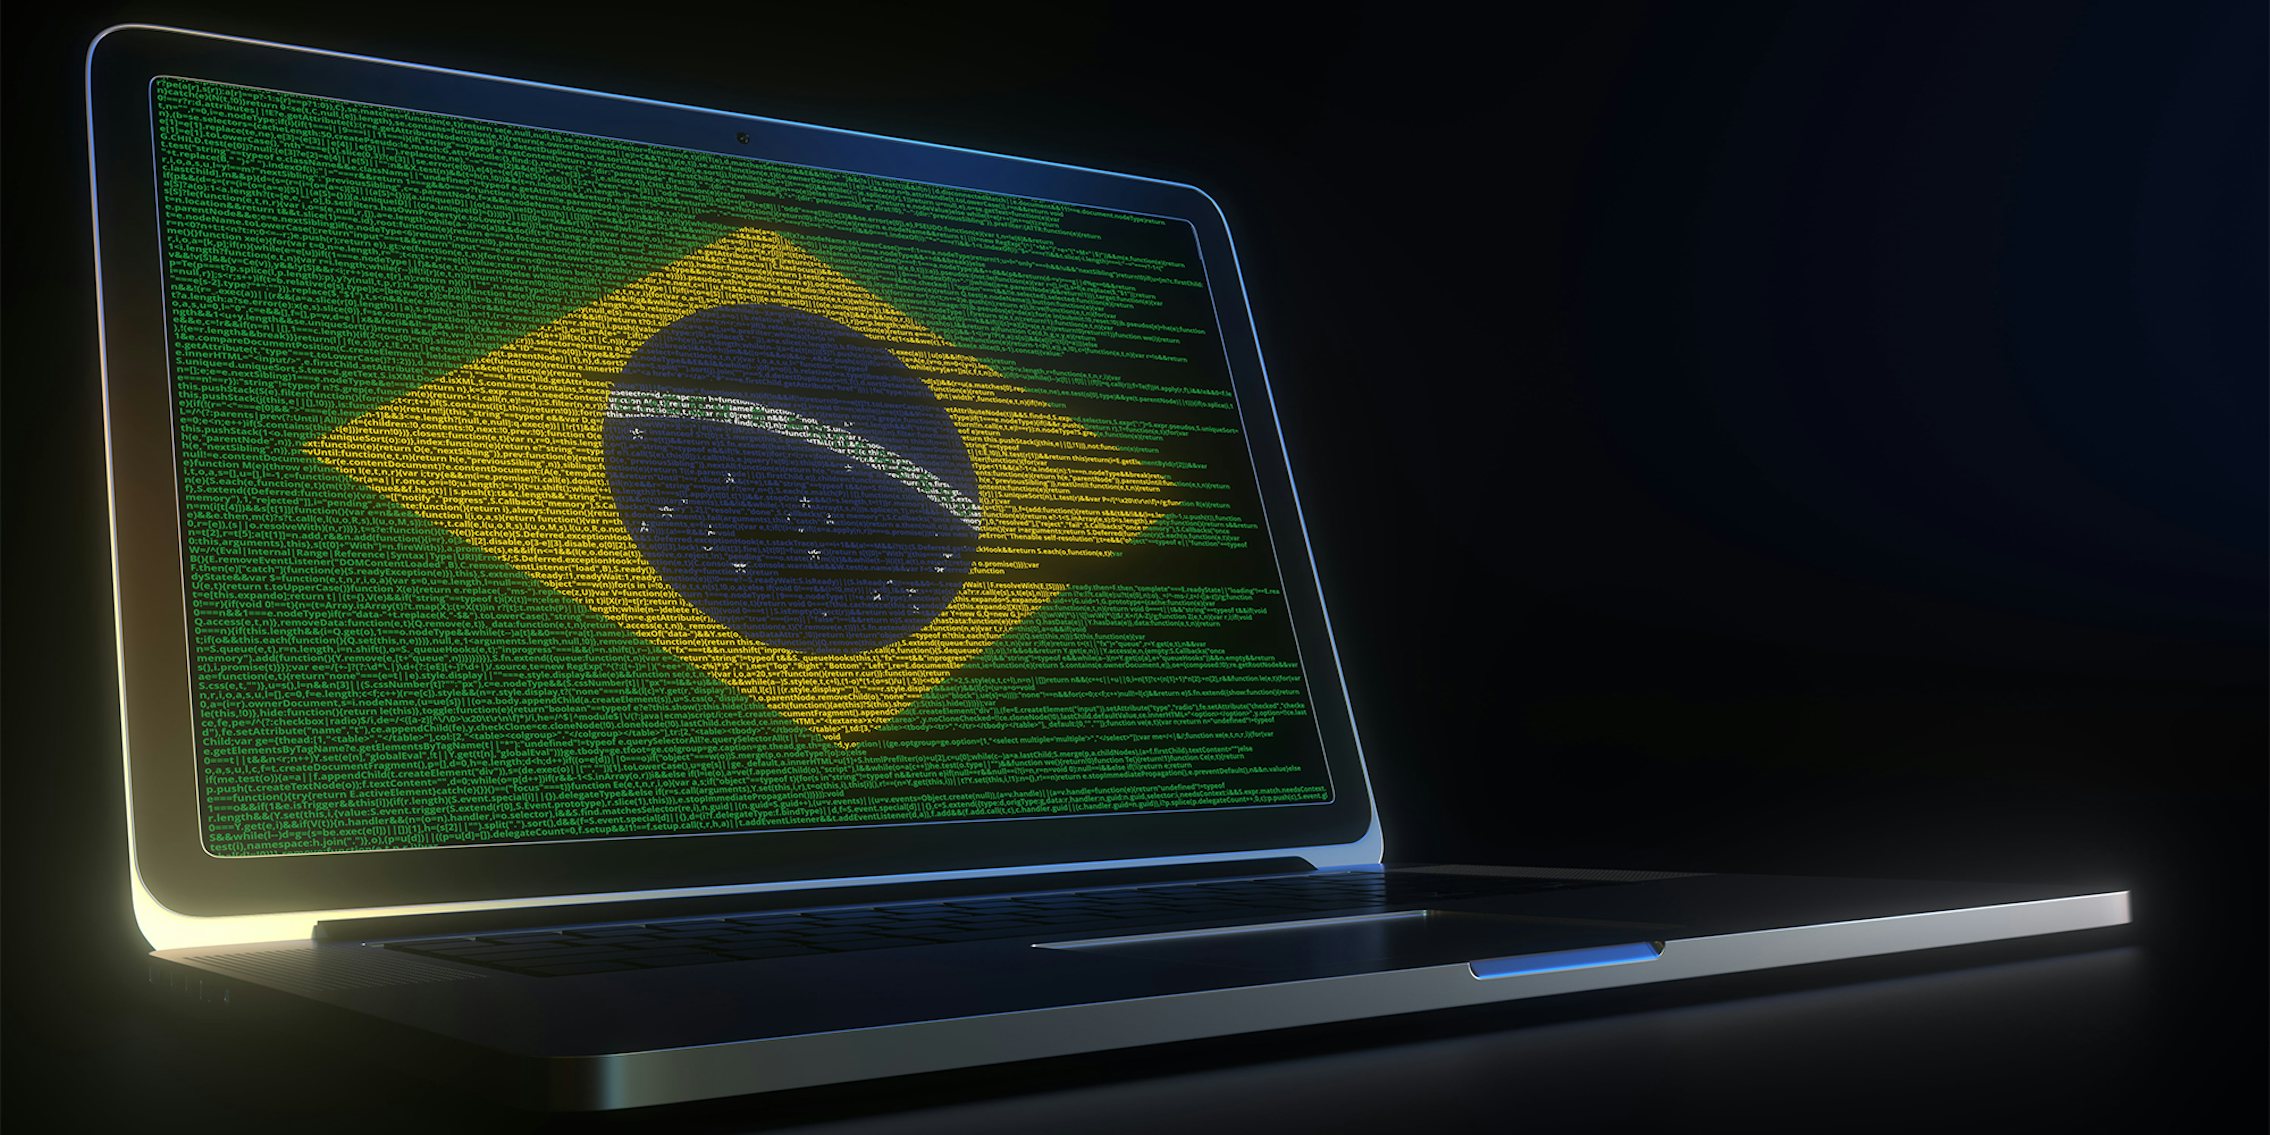 Flag of brazil made with computer code on the laptop screen. hacking or cybersecurity related 3D rendering